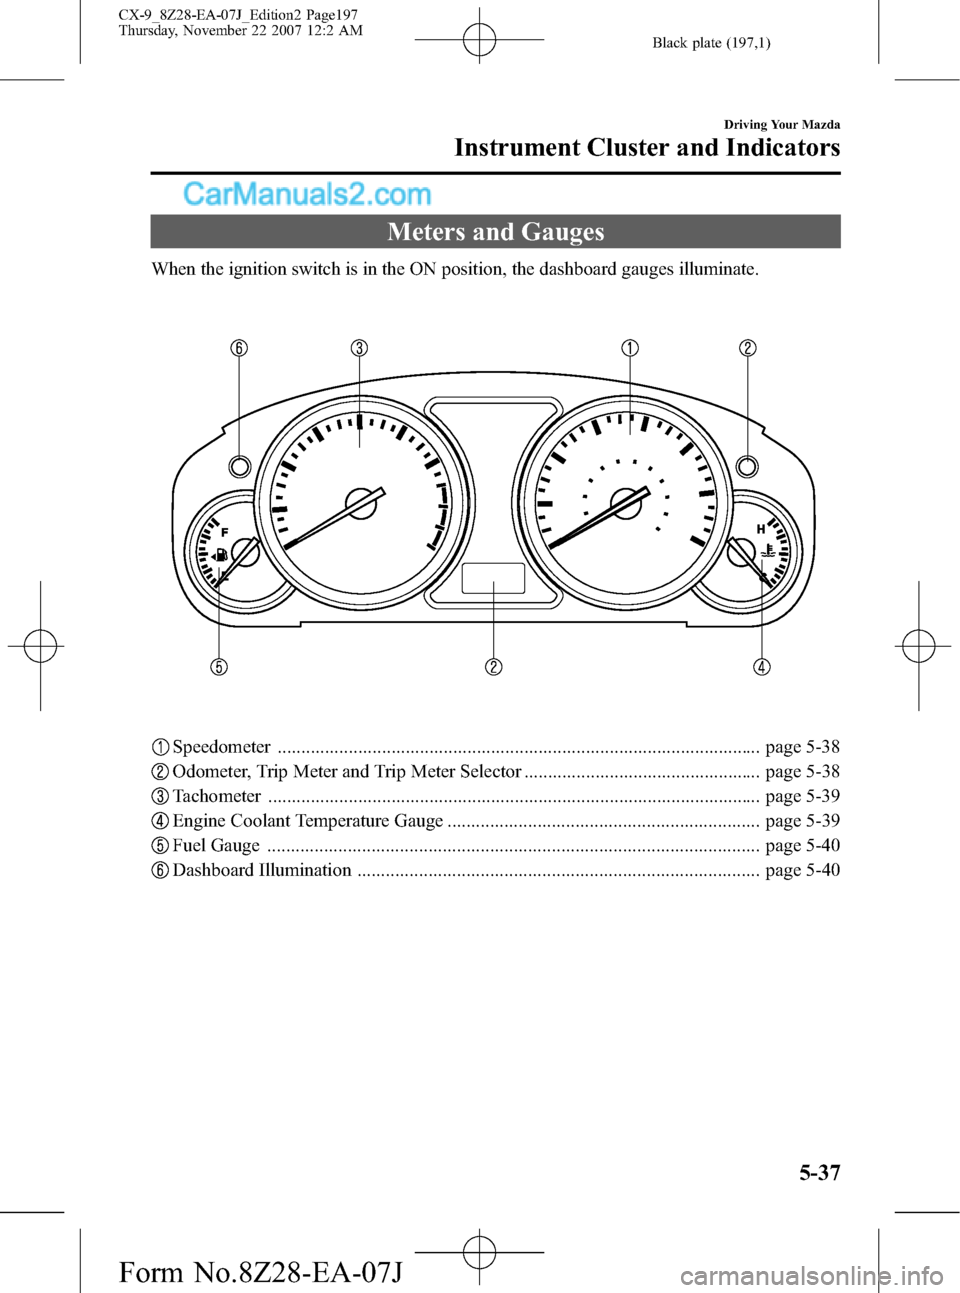 MAZDA MODEL CX-9 2008  Owners Manual (in English) Black plate (197,1)
Meters and Gauges
When the ignition switch is in the ON position, the dashboard gauges illuminate.
Speedometer .....................................................................